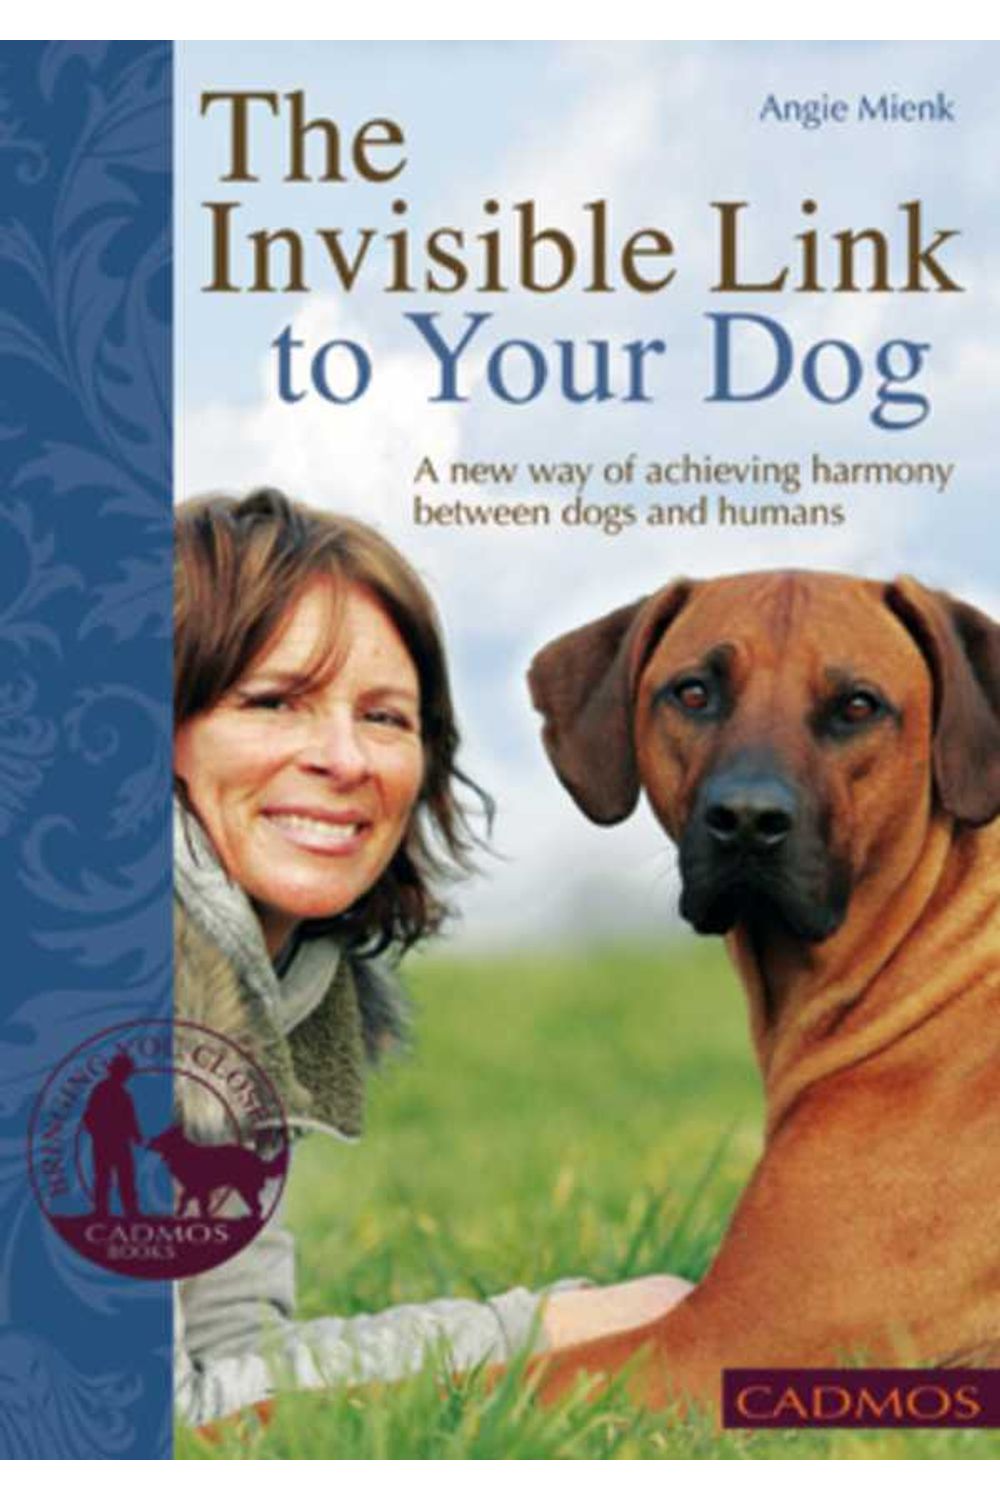 bw-the-invisible-link-to-your-dog-cadmos-publishing-9780857886200